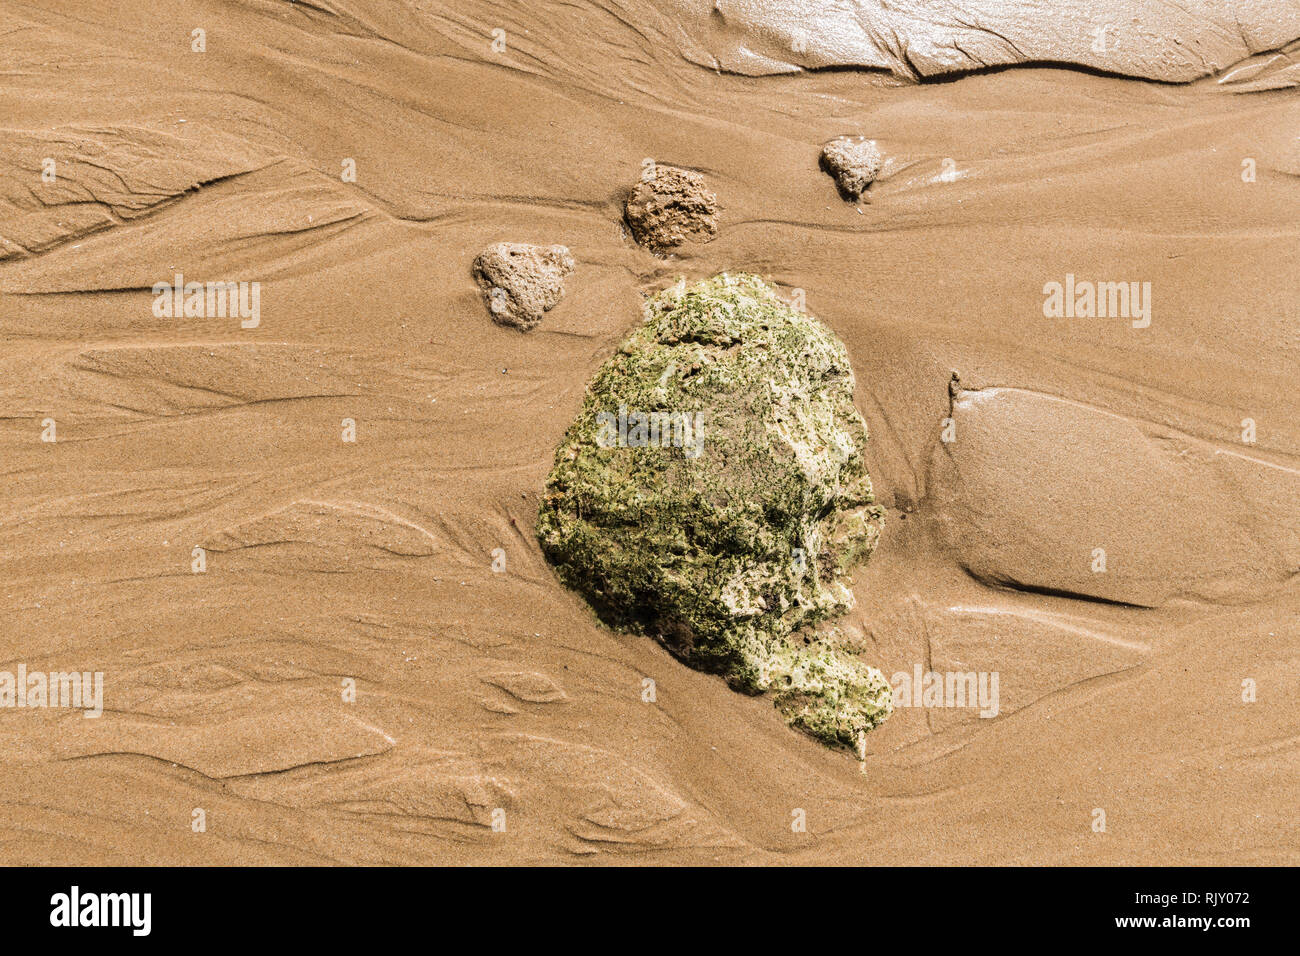 Rock surrounded by wet sand, close up Stock Photo